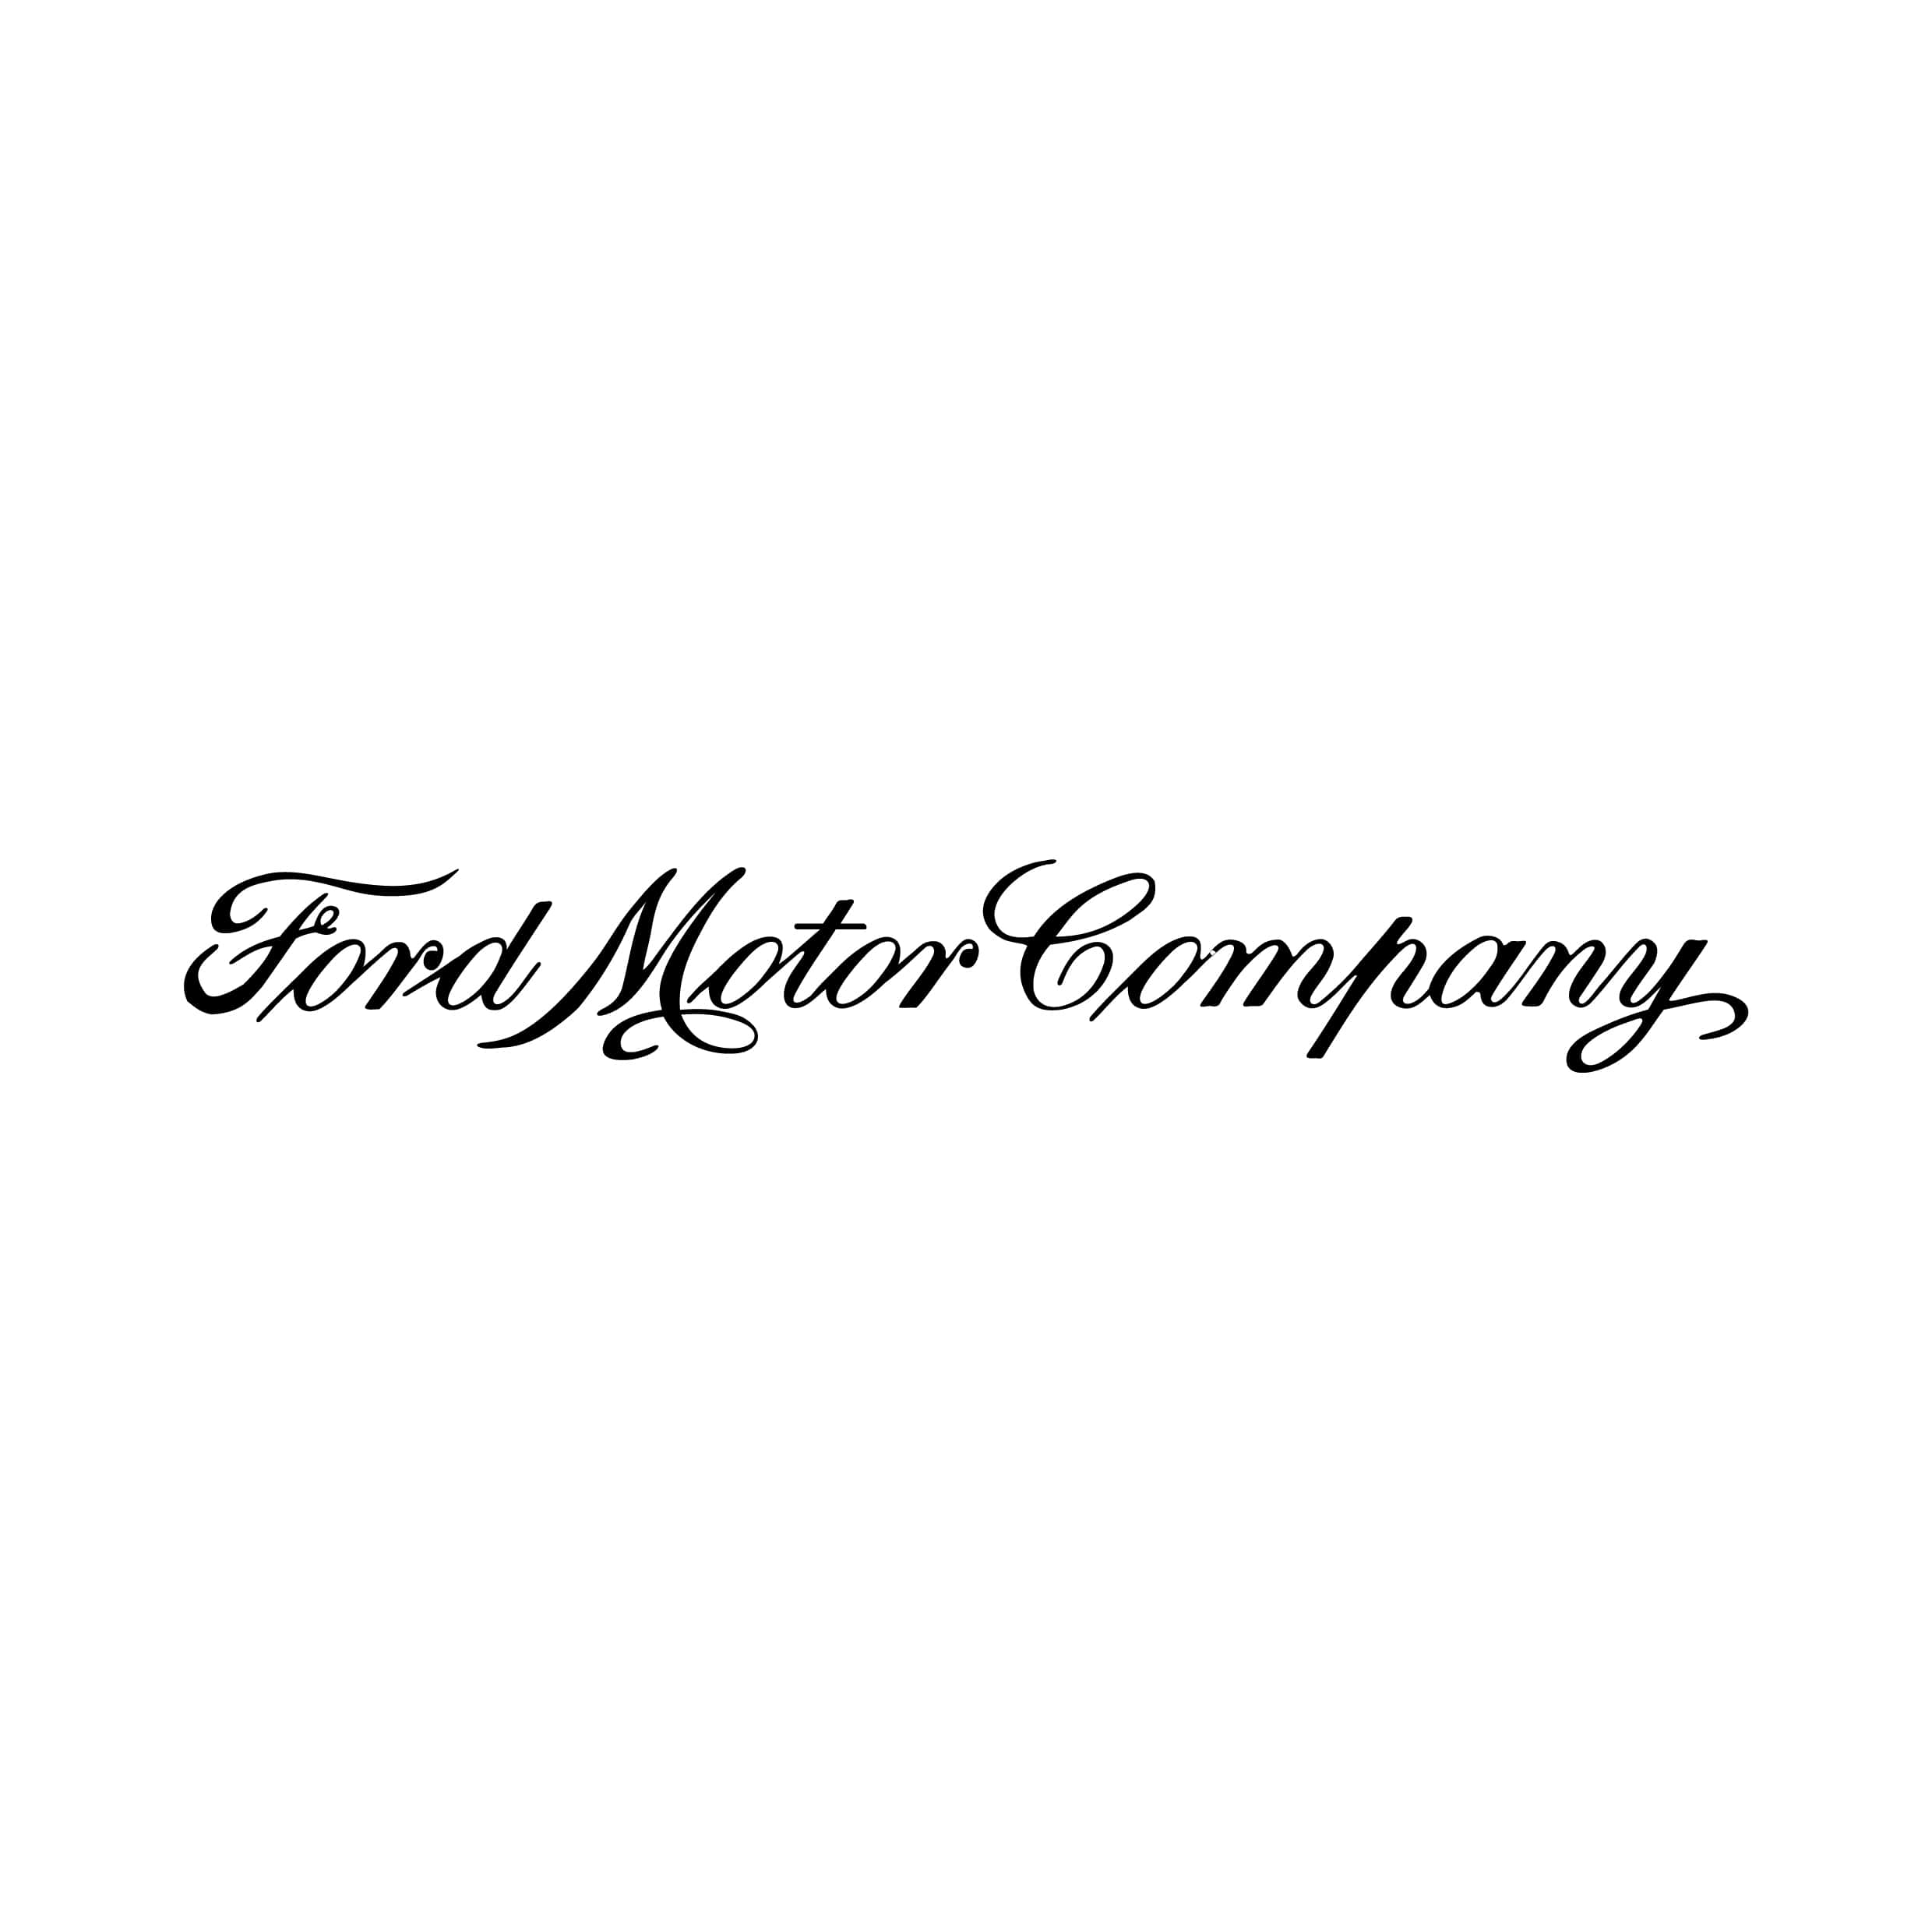 stickers-ford-motor-company-ref31-autocollant-voiture-sticker-auto-autocollants-decals-sponsors-racing-tuning-sport-logo-min